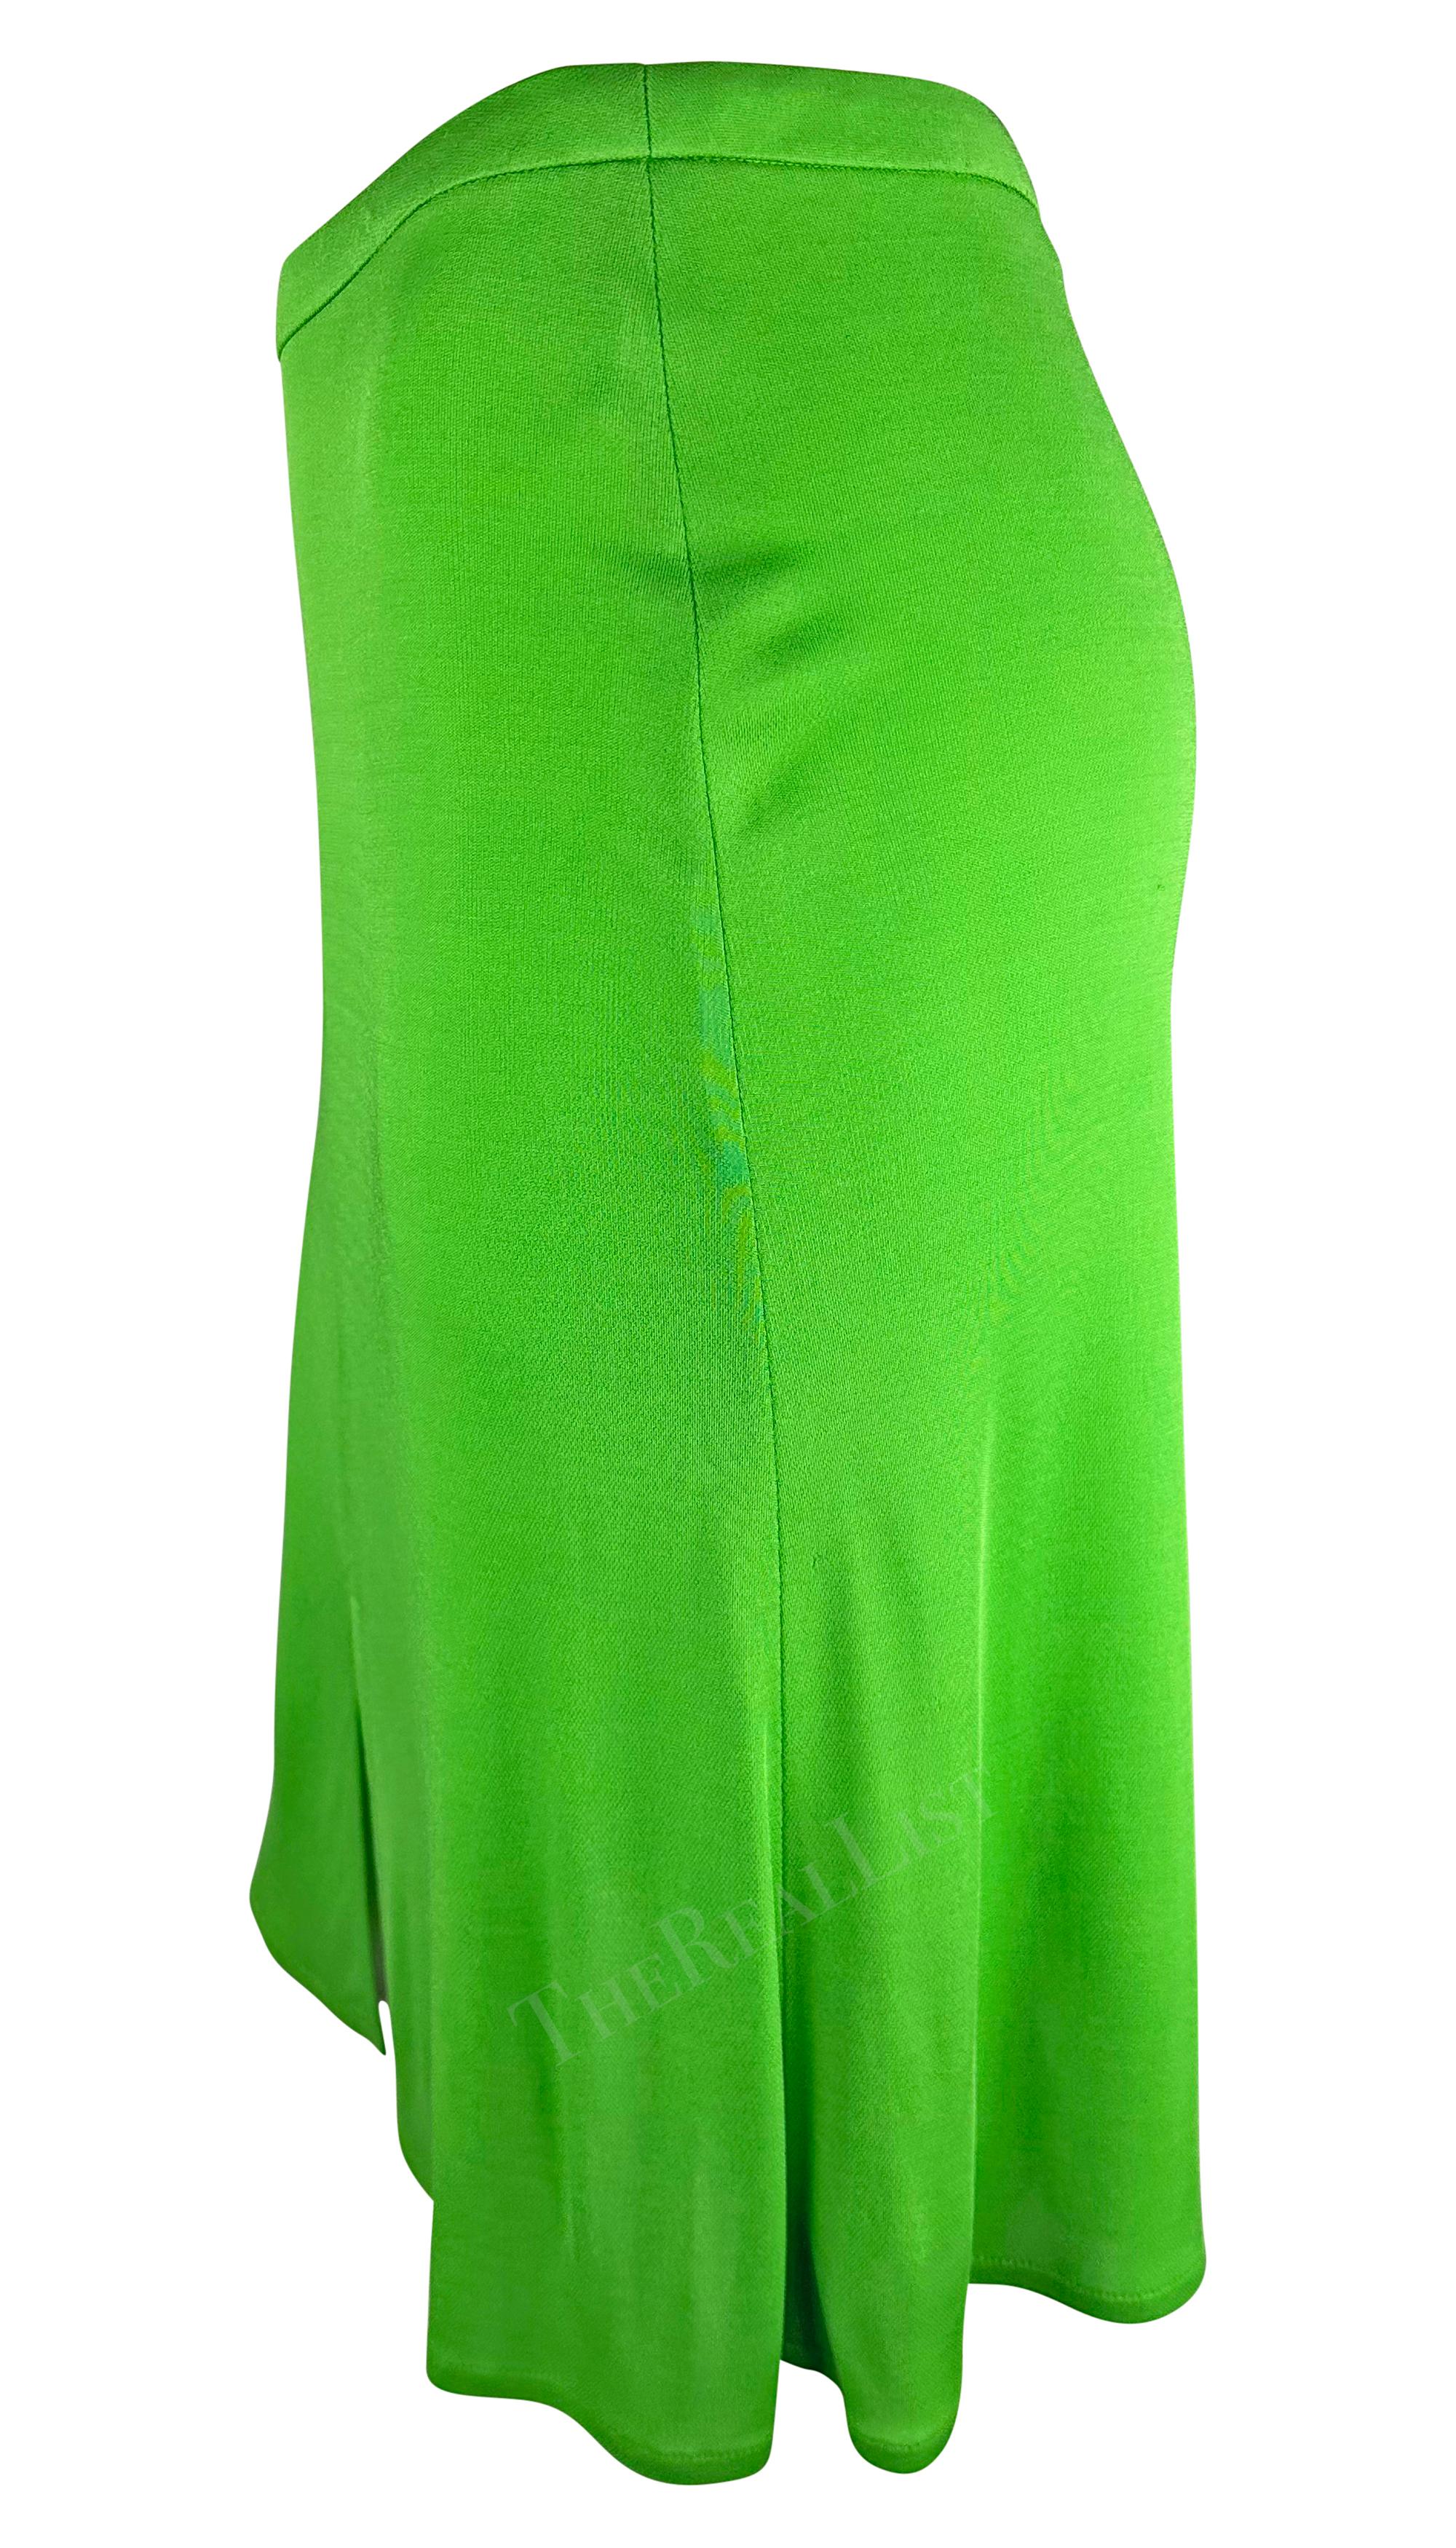 S/S 2000 Gianni Versace by Donatella Bright Green Viscose Slit Skirt In Good Condition For Sale In West Hollywood, CA